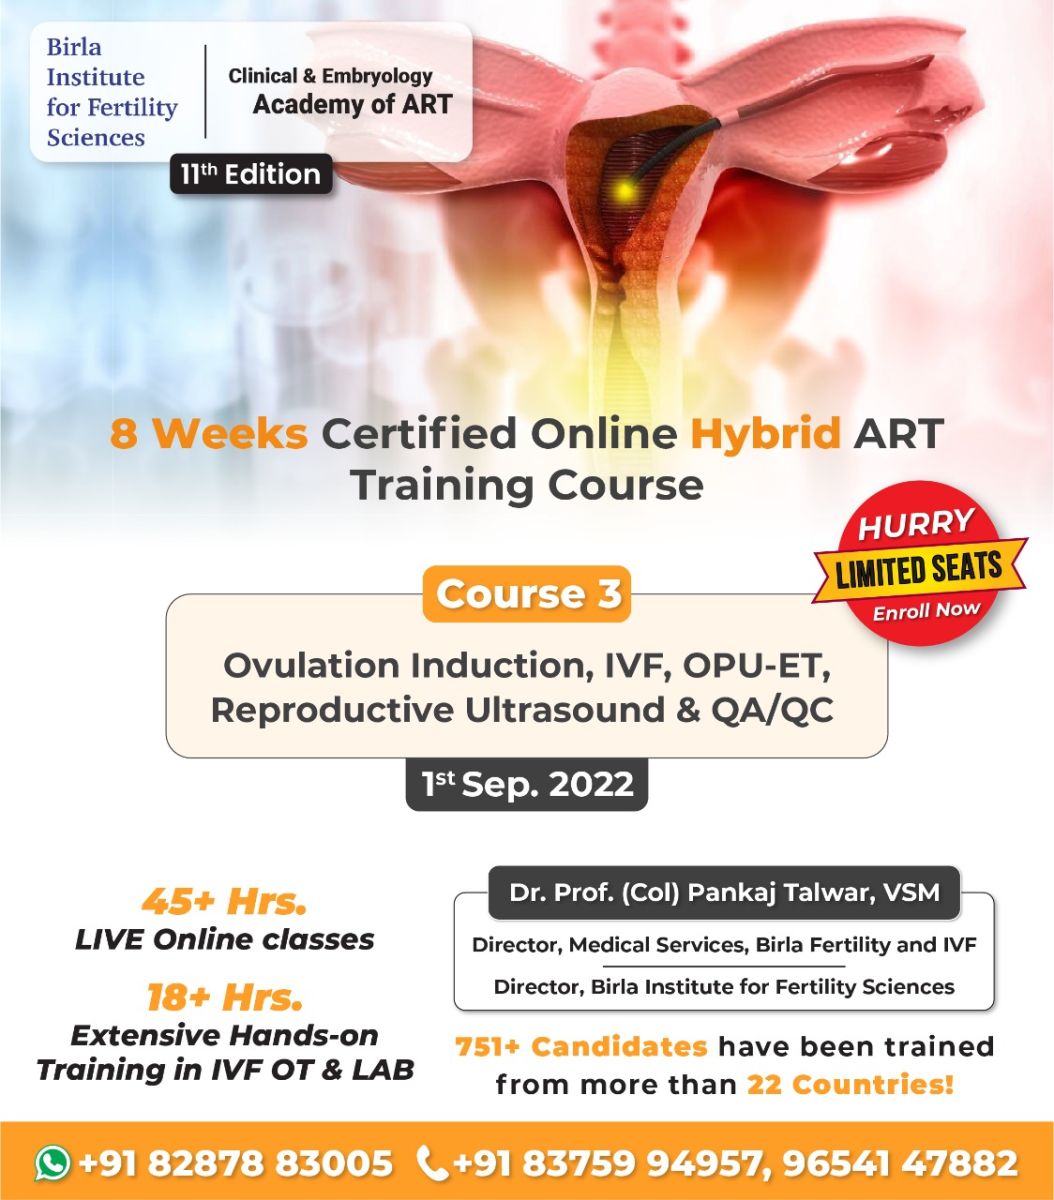 Course 03- Ovulation Induction, IVF, OPU-ET, Reproductive Ultrasound, and QA/QC